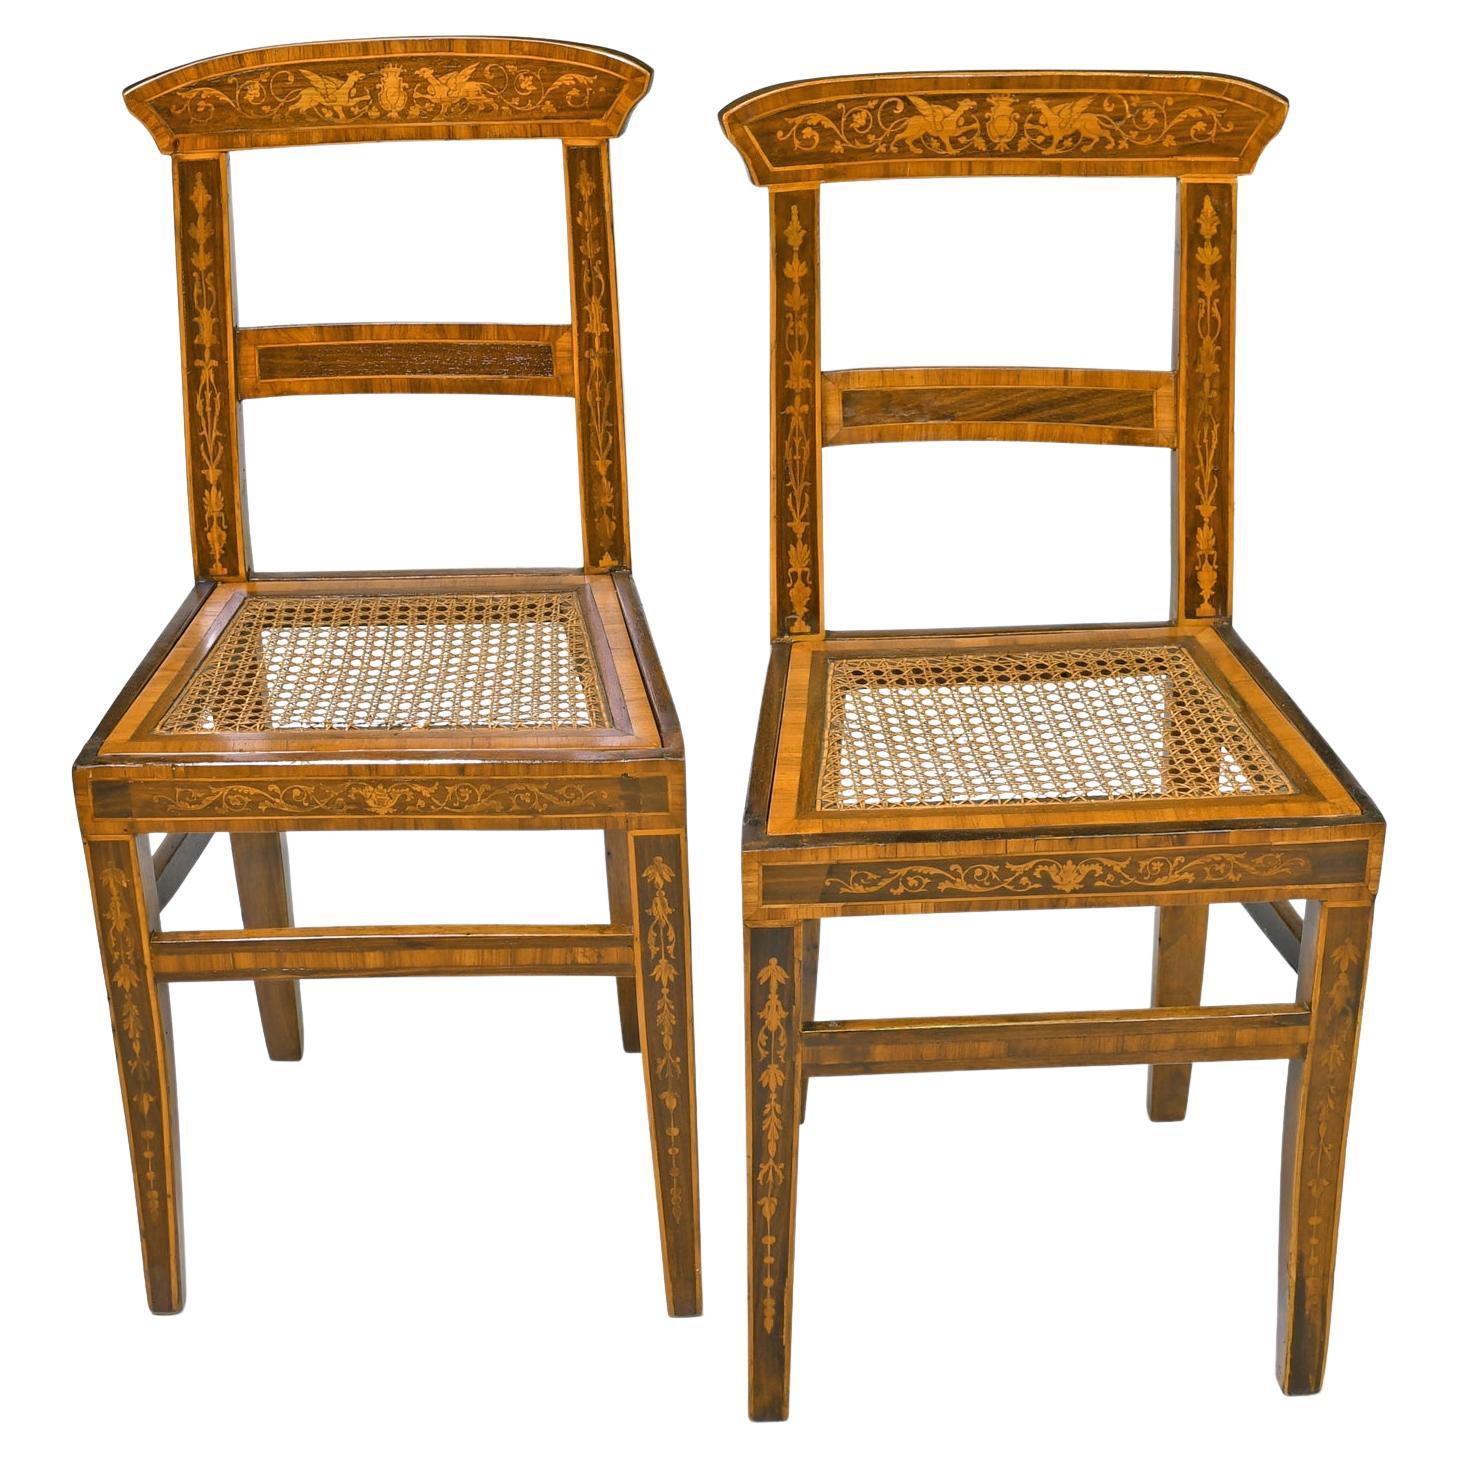 Pair of Antique English Regency Side Chairs with Marquetry Inlays & Caned Seat For Sale